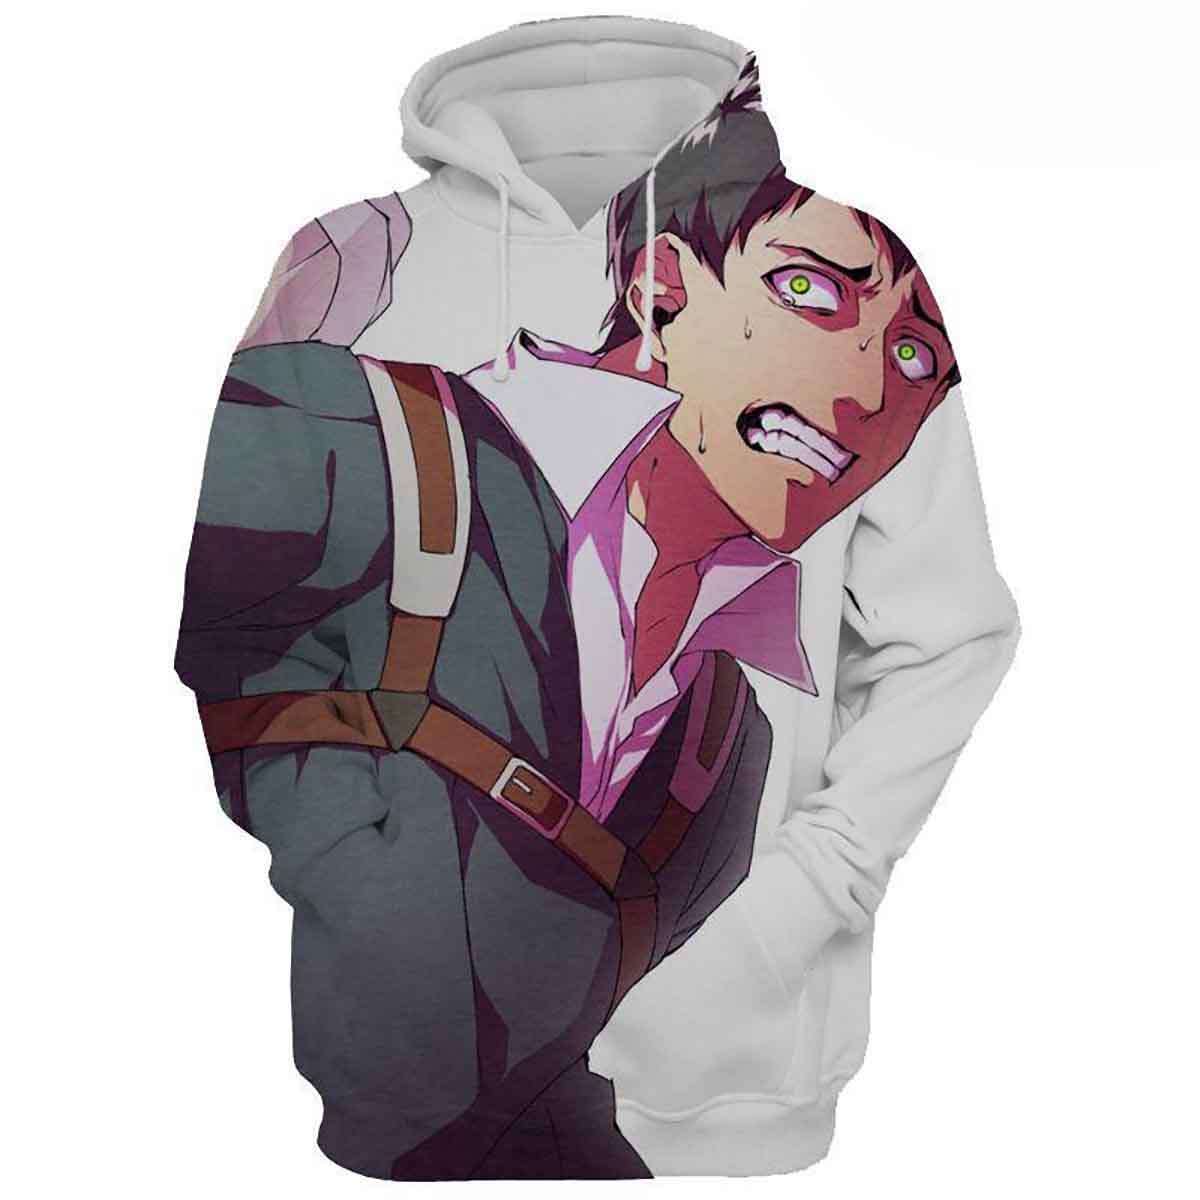 Bertholdt Hoover Stalked By Titans - Attack On Titan Cosplay Anime Hd 3d Aop Hoodie